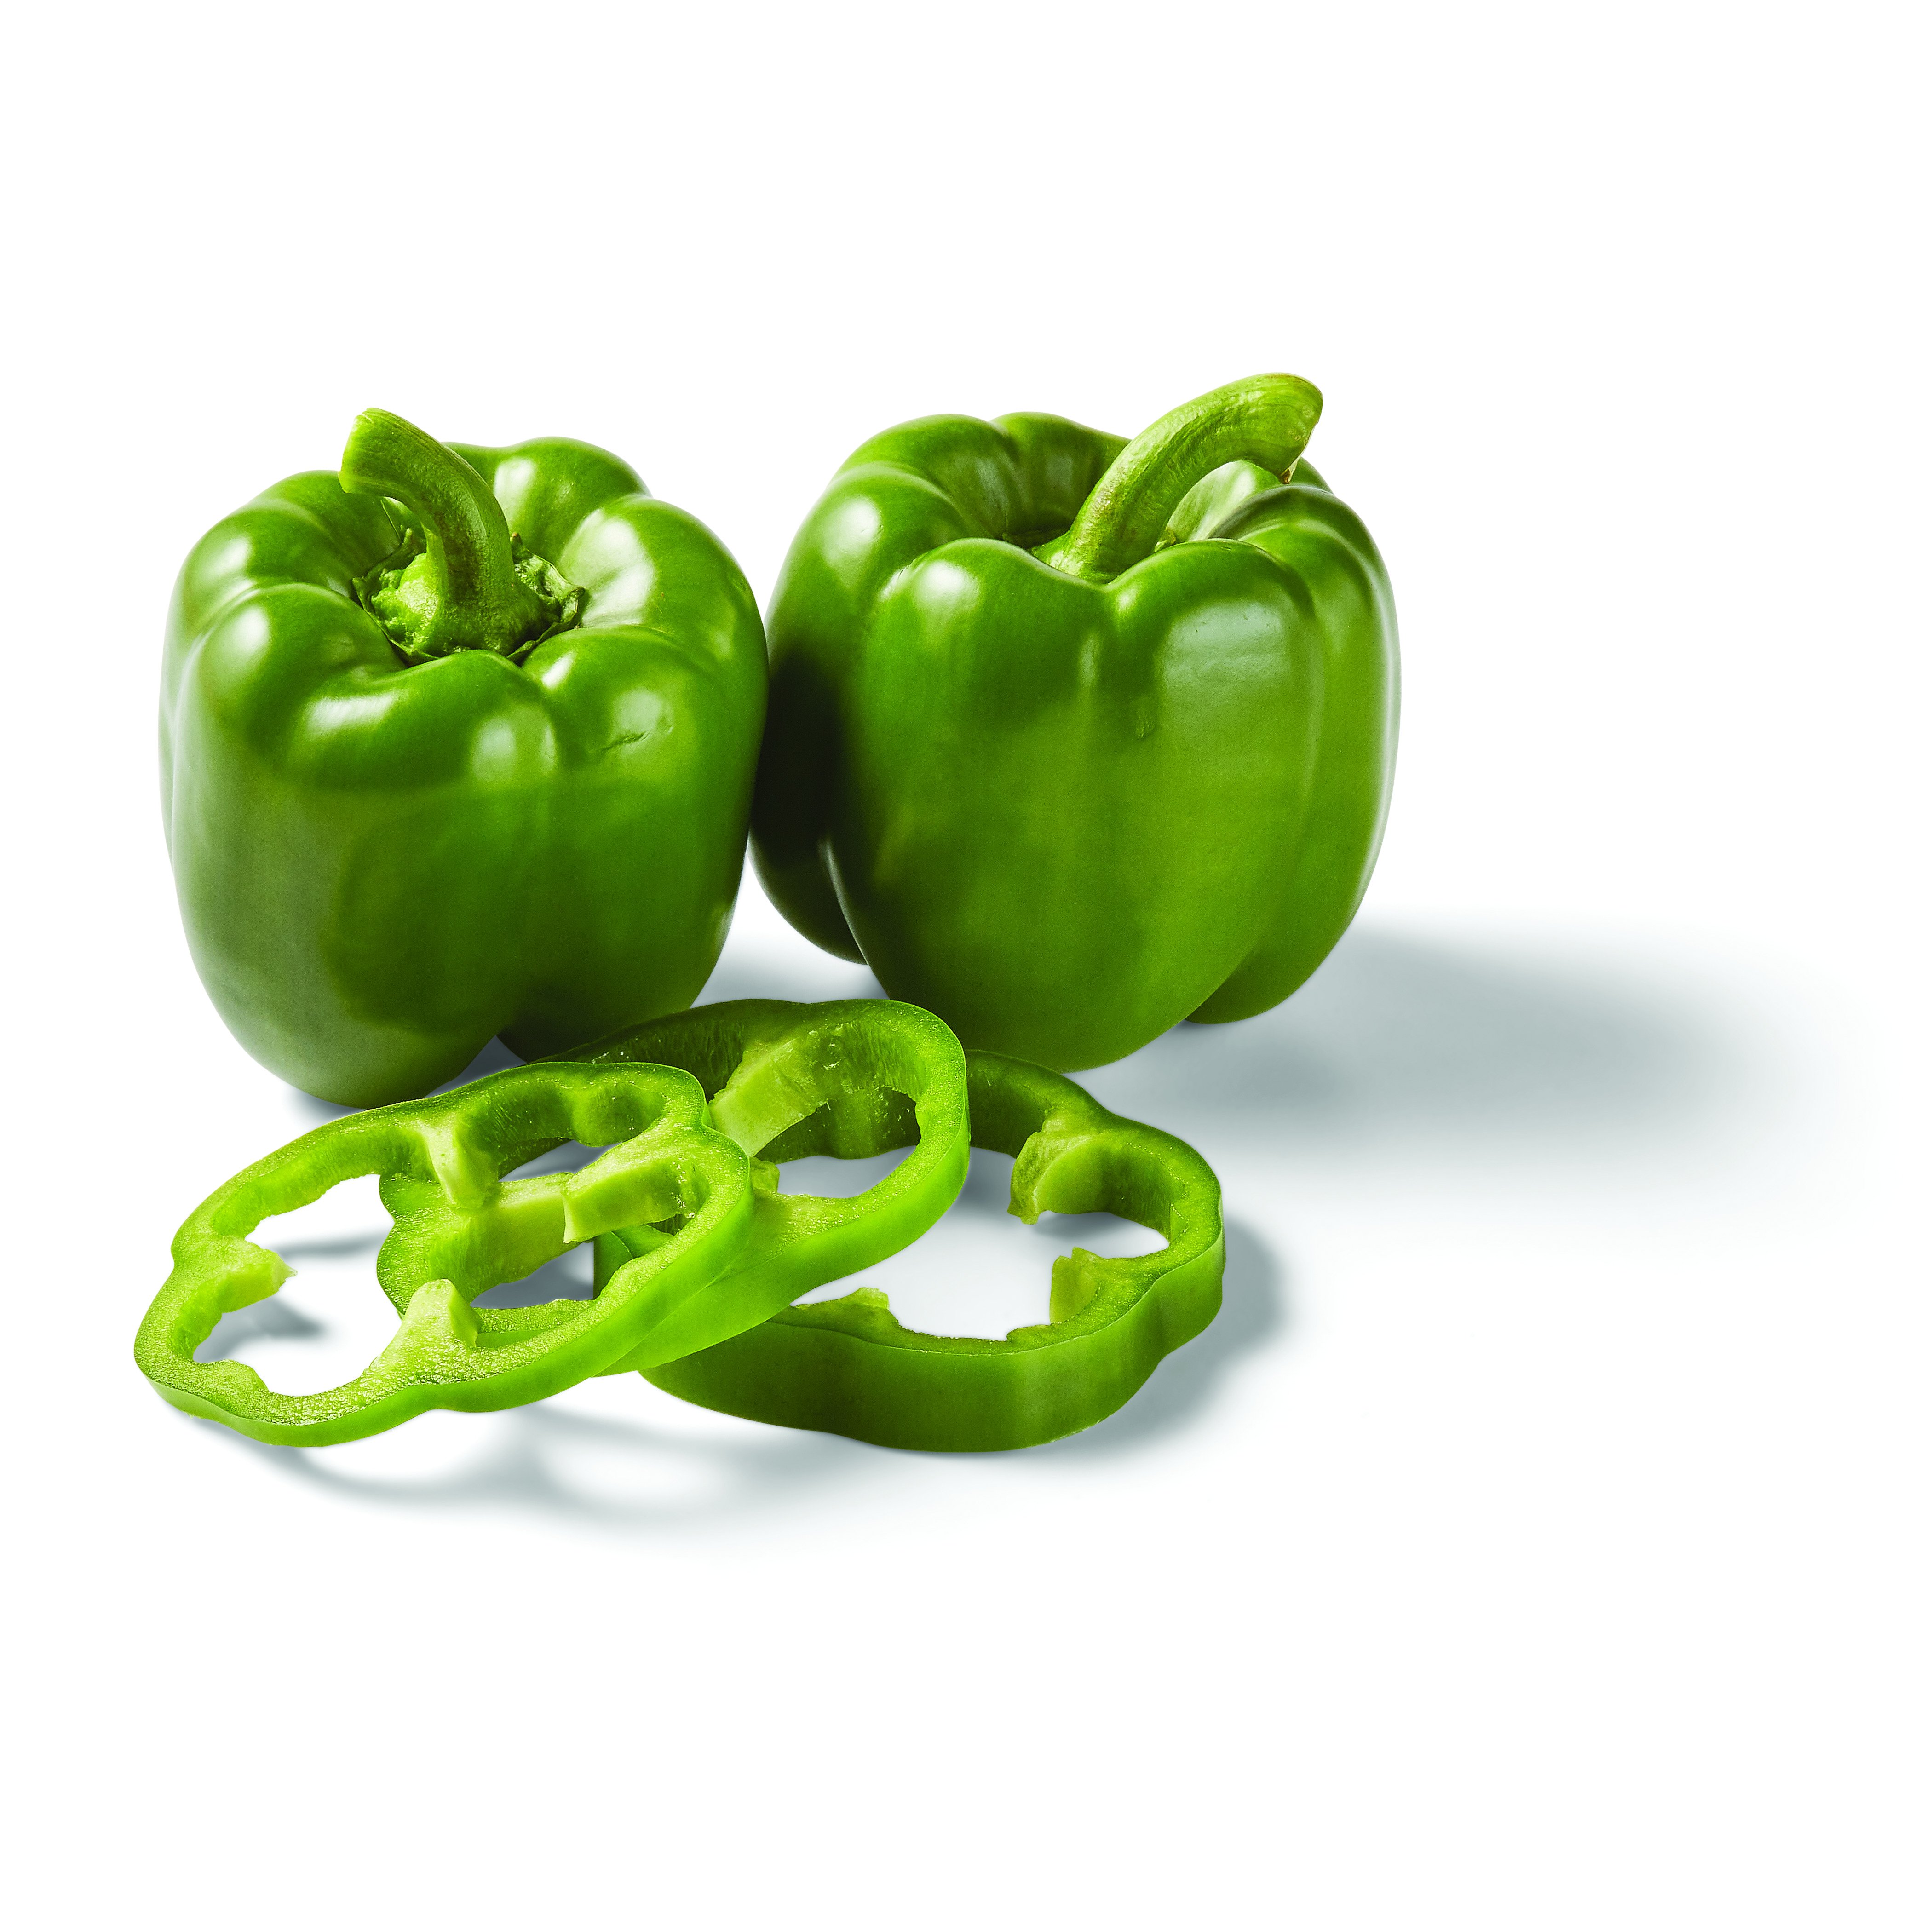 GREEN BELL PEPPERS FRESH FRUIT PRODUCE VEGETABLES BY THE POUND